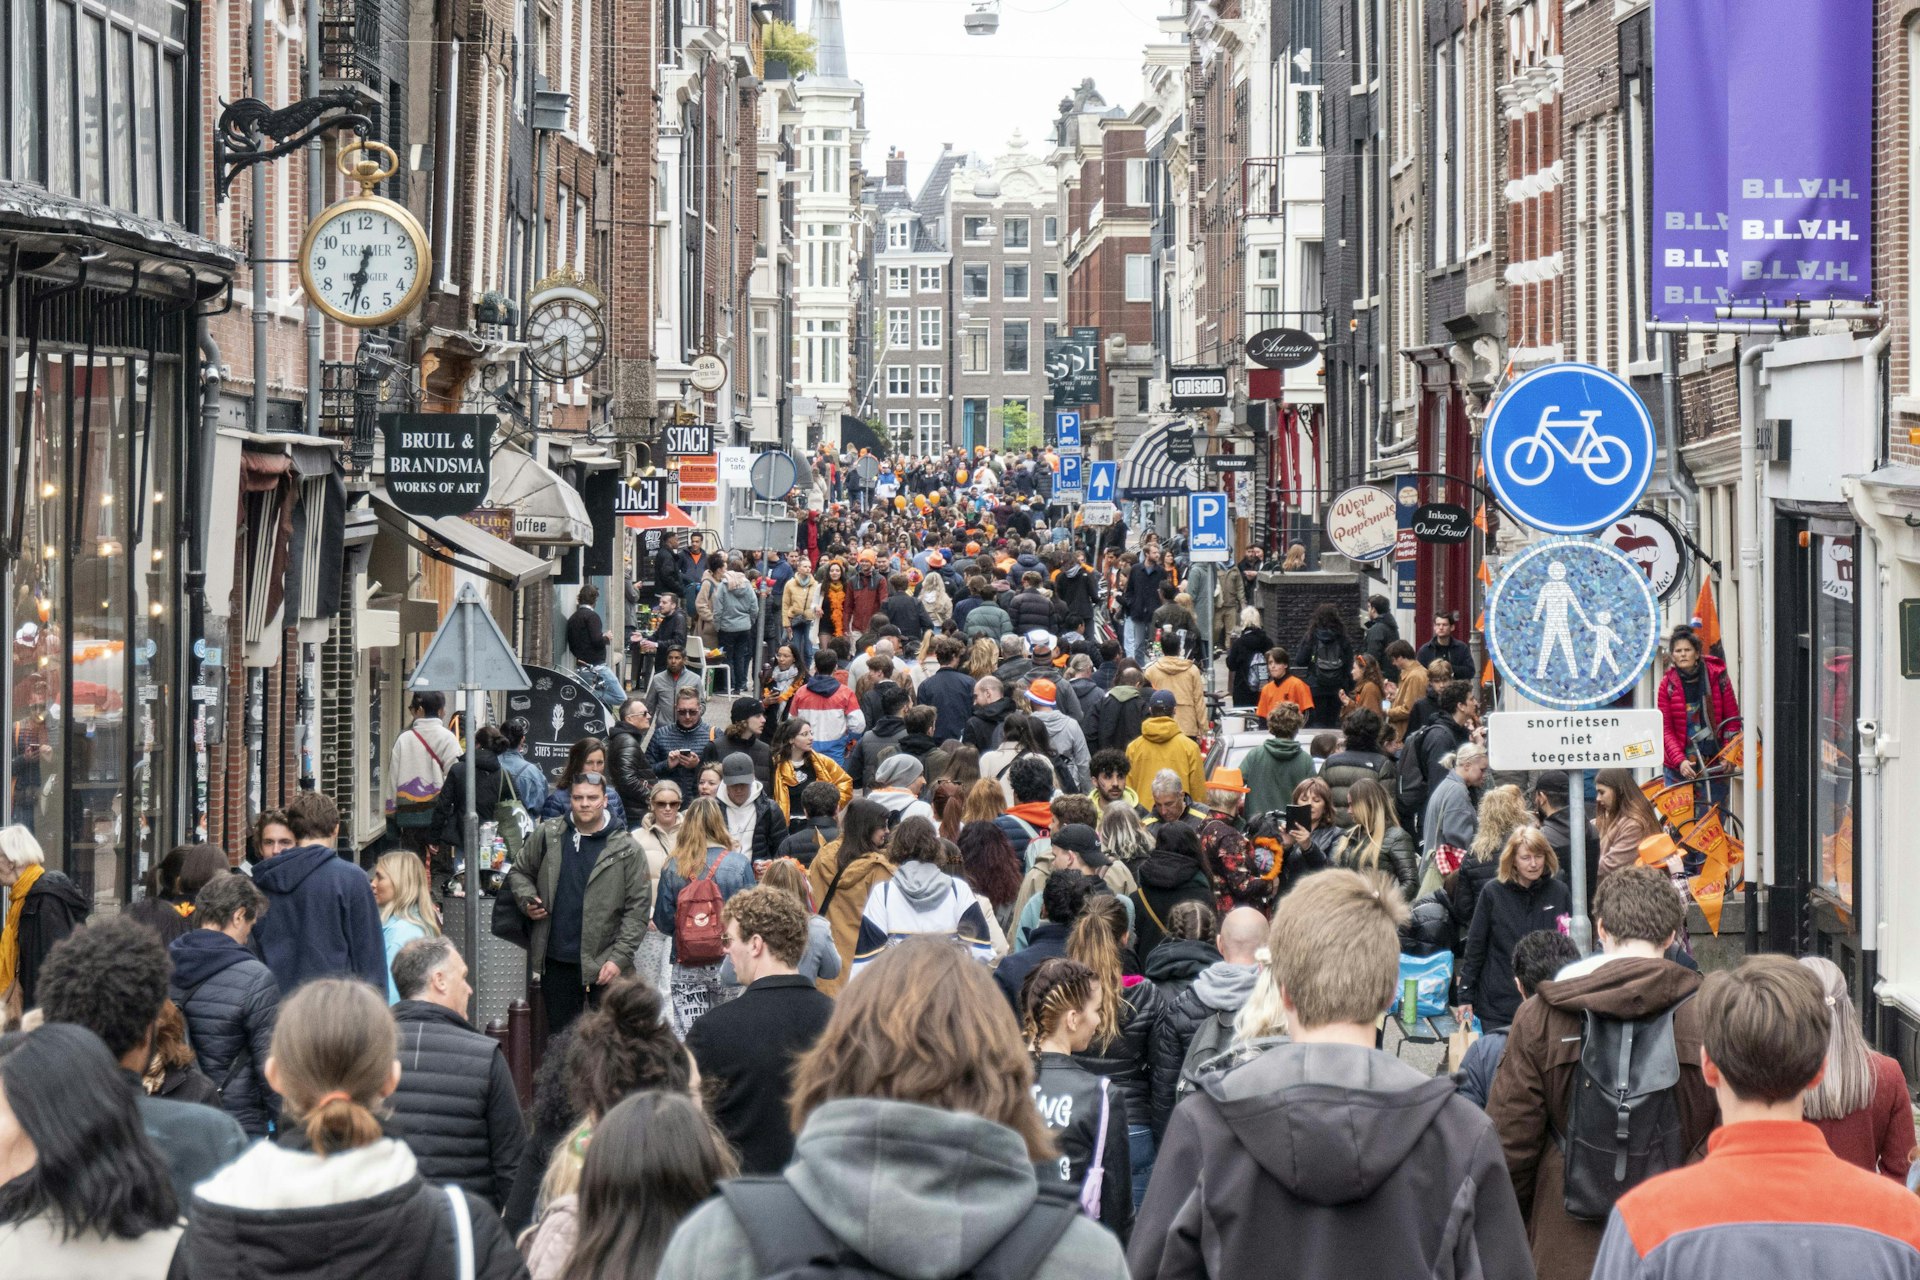 Crowds of people on a narrow street in Amsterdam, the Netherlands